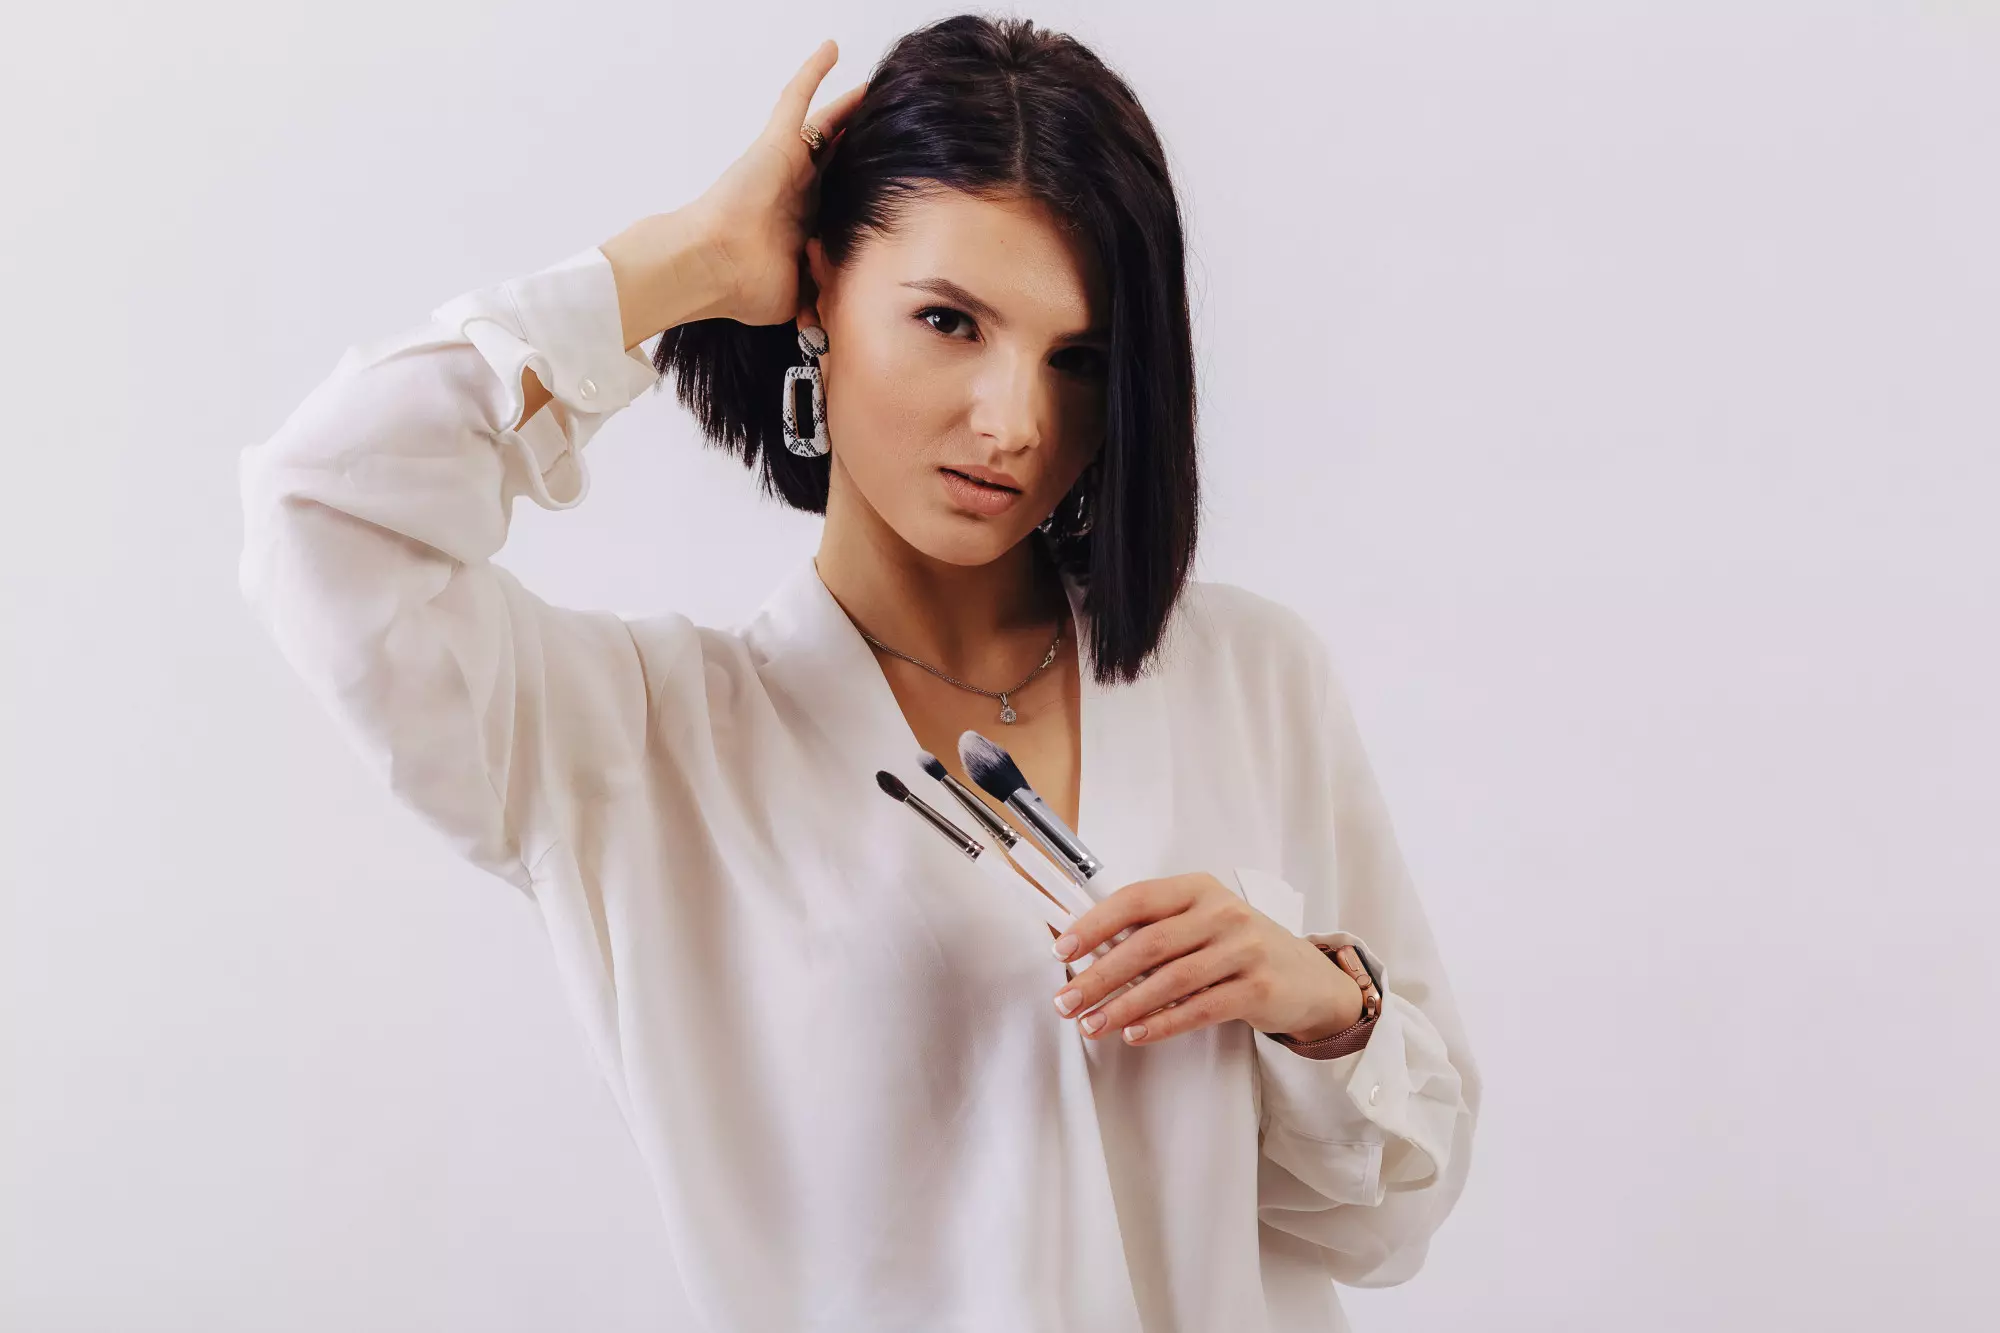 brunette with bob hairstyle in a white shirt